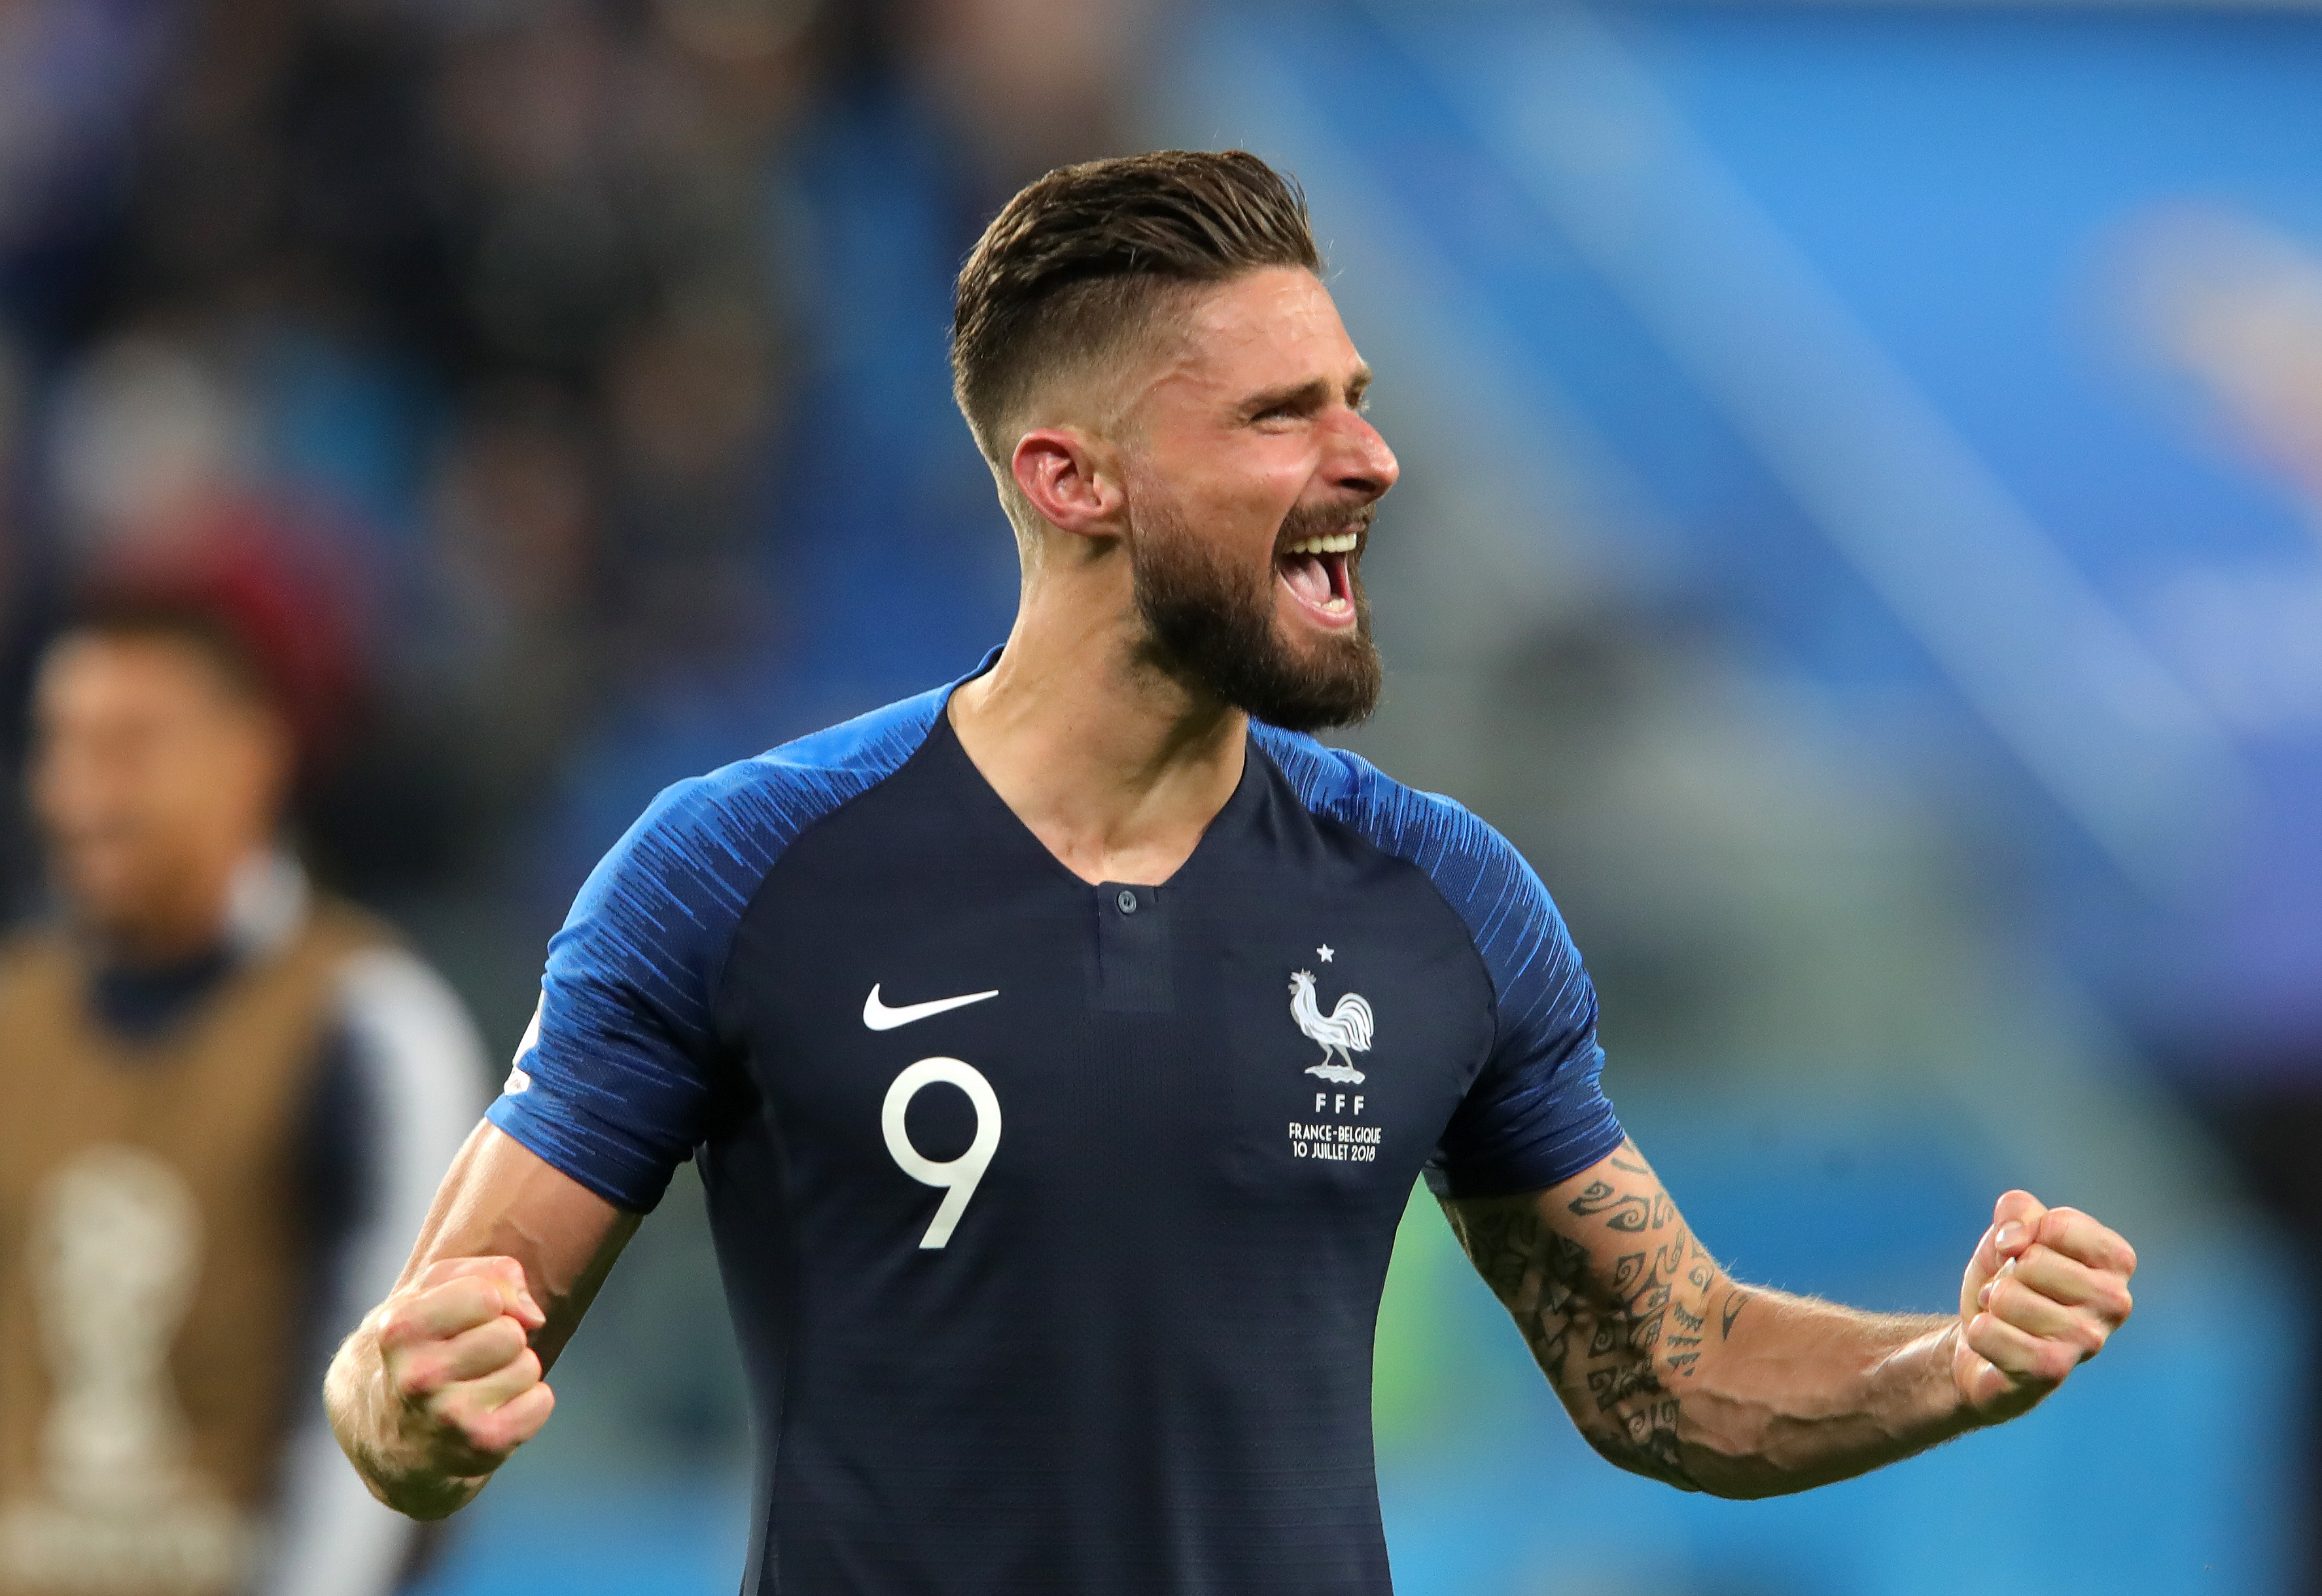 SAINT PETERSBURG, RUSSIA - JULY 10:  Olivier Giroud of France celebrates following his sides victory in the 2018 FIFA World Cup Russia Semi Final match between Belgium and France at Saint Petersburg Stadium on July 10, 2018 in Saint Petersburg, Russia.  (Photo by Alexander Hassenstein/Getty Images)